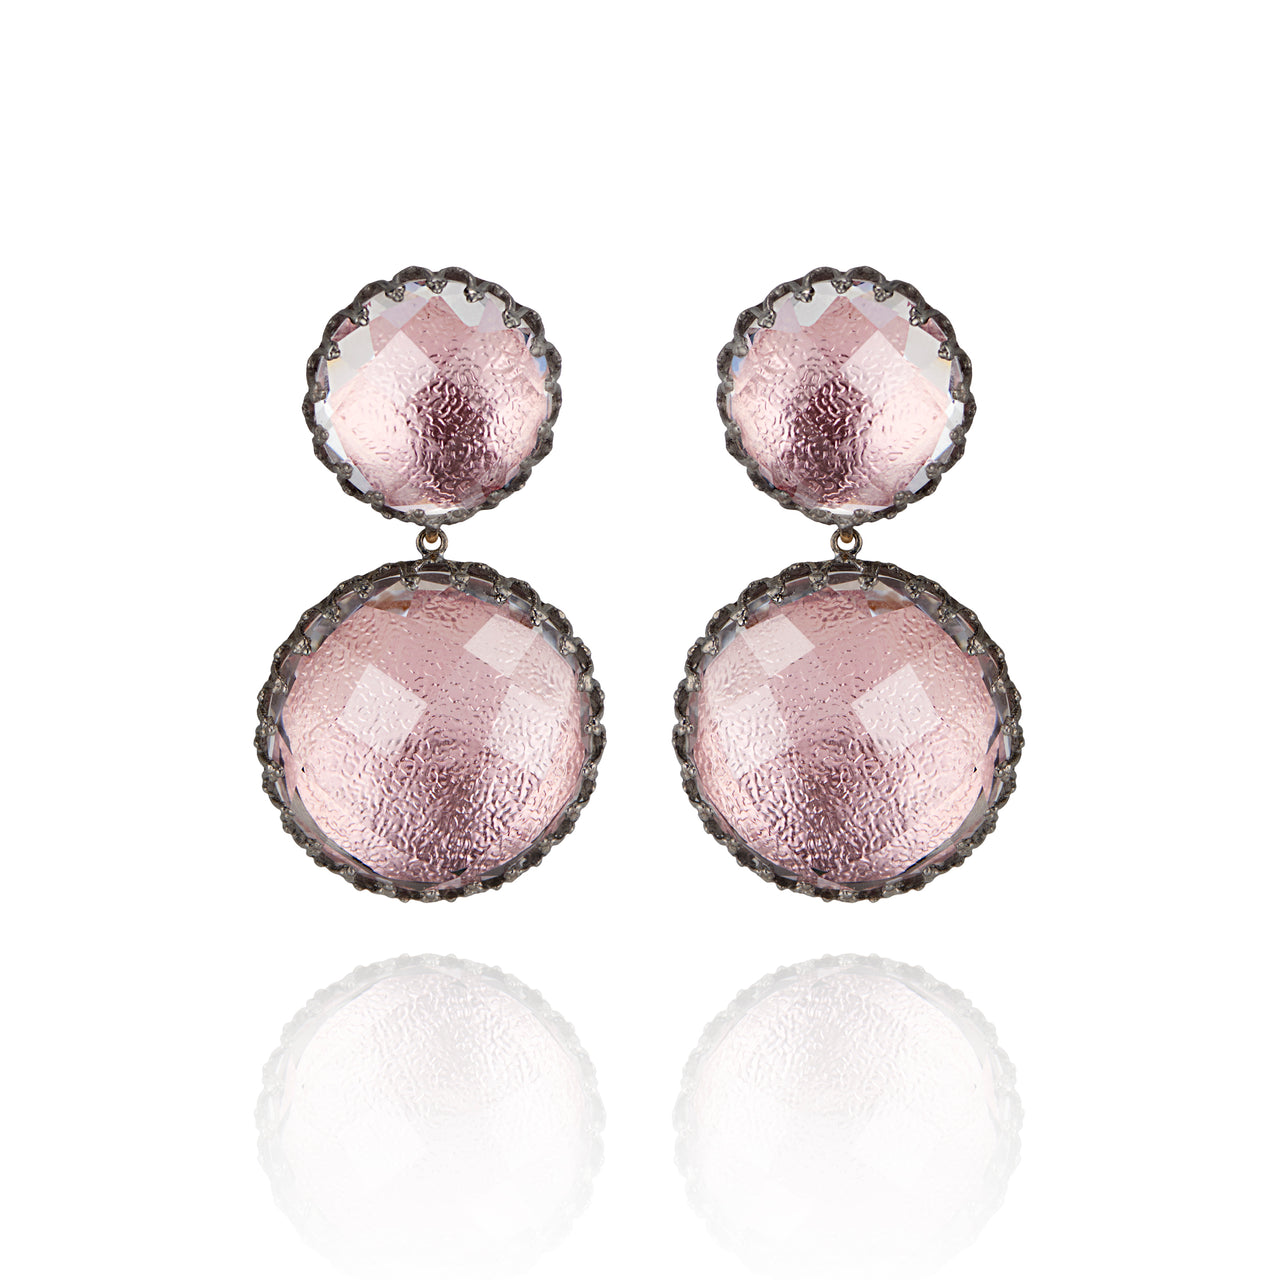 Olivia Large Day Night Earrings